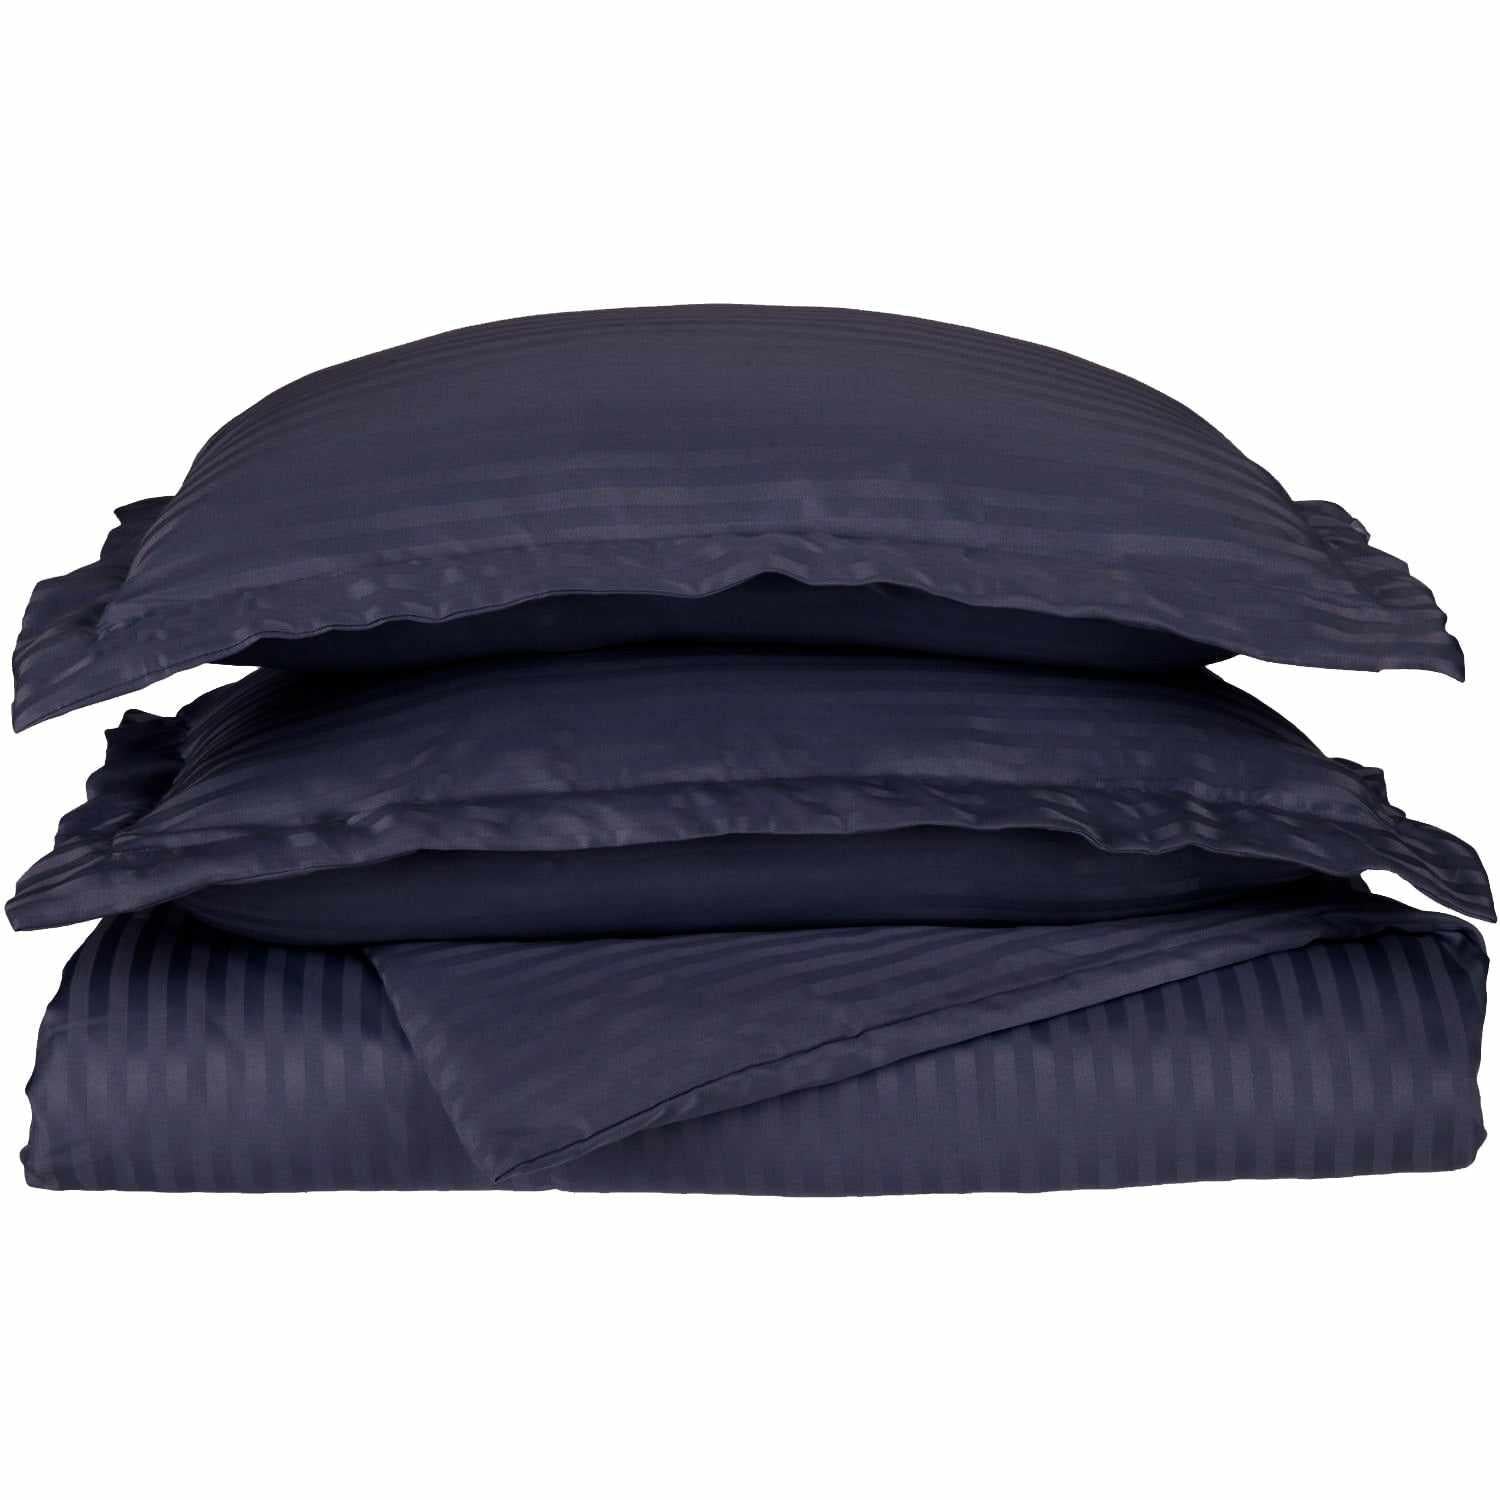 Superior Microfiber Wrinkle-Free Stripe Breathable Duvet Cover Set with Button Closure - Navy Blue